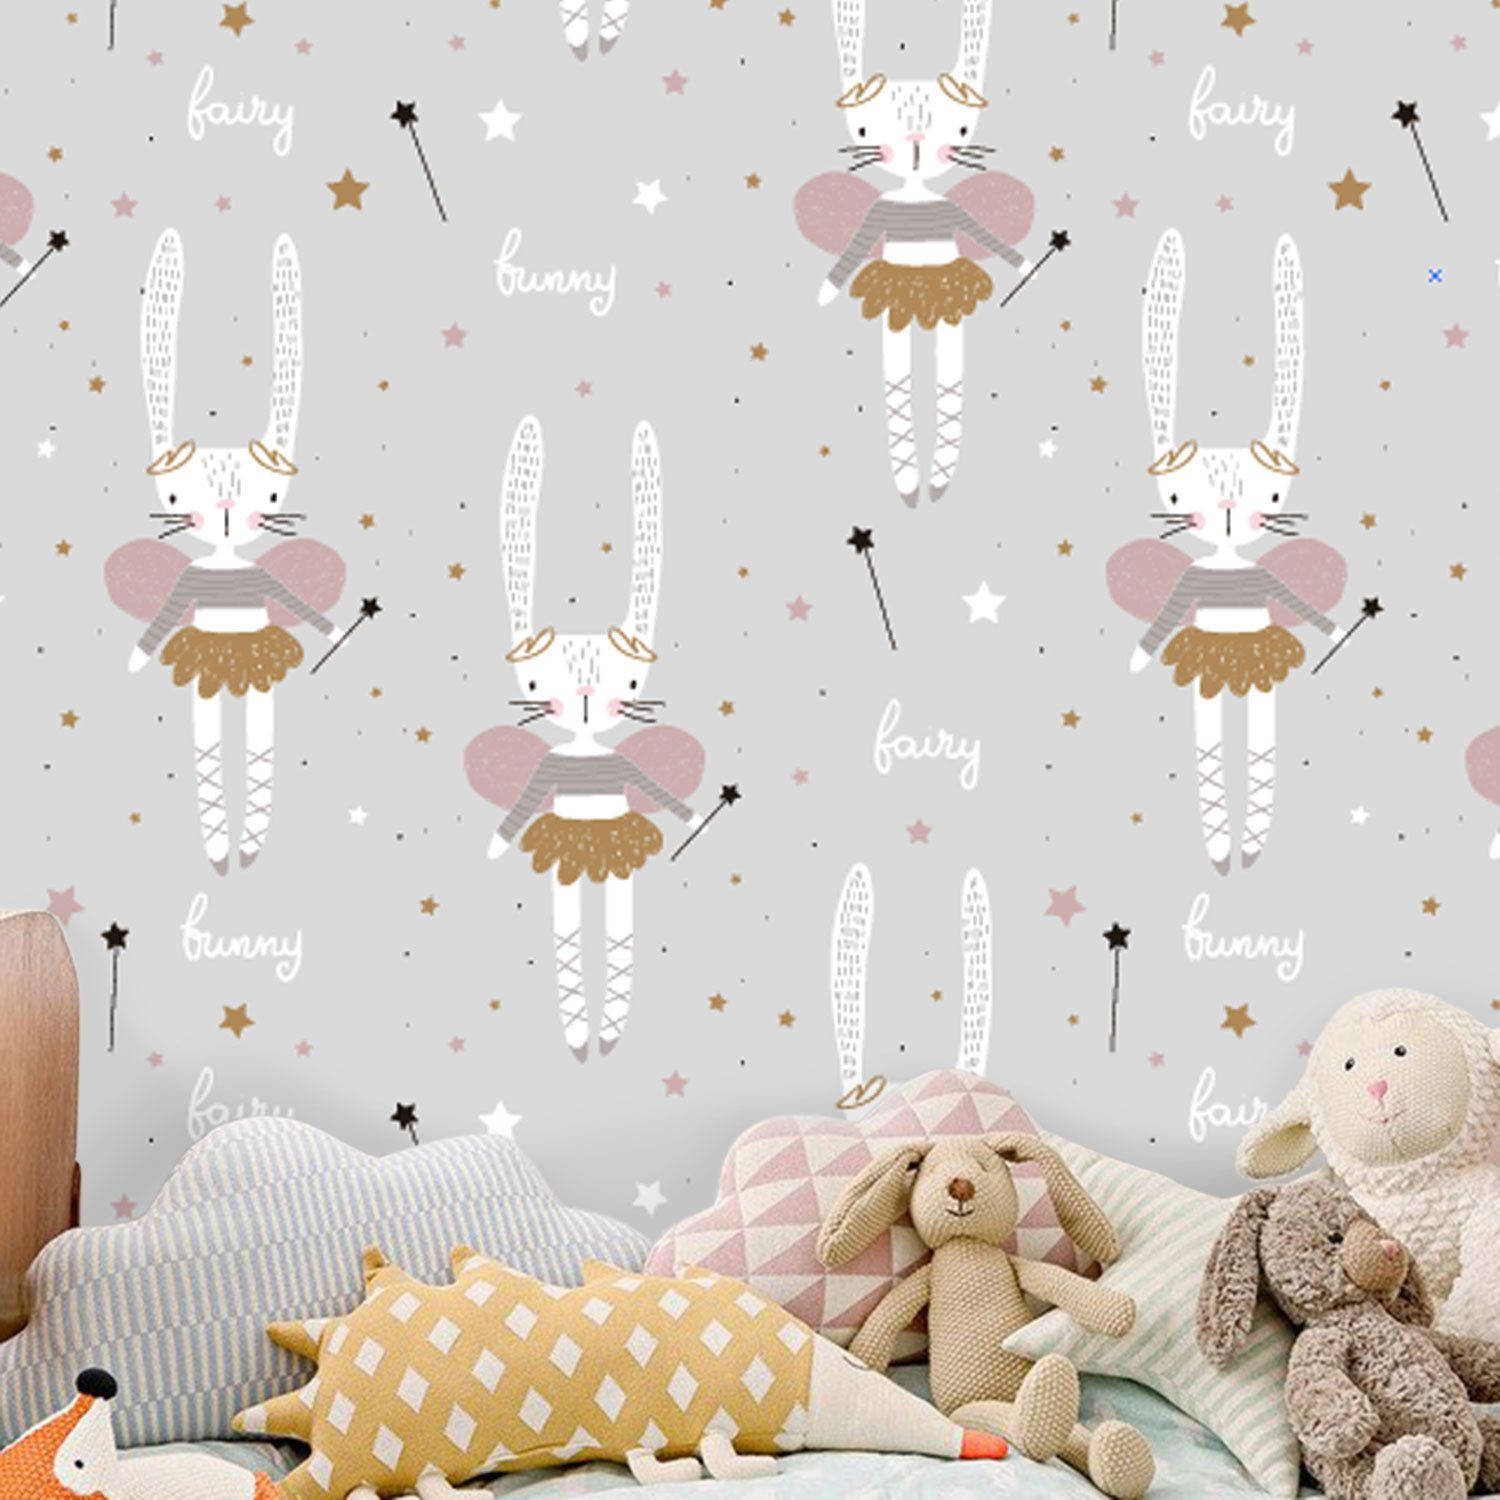 Cute Bunny Room Theme Background